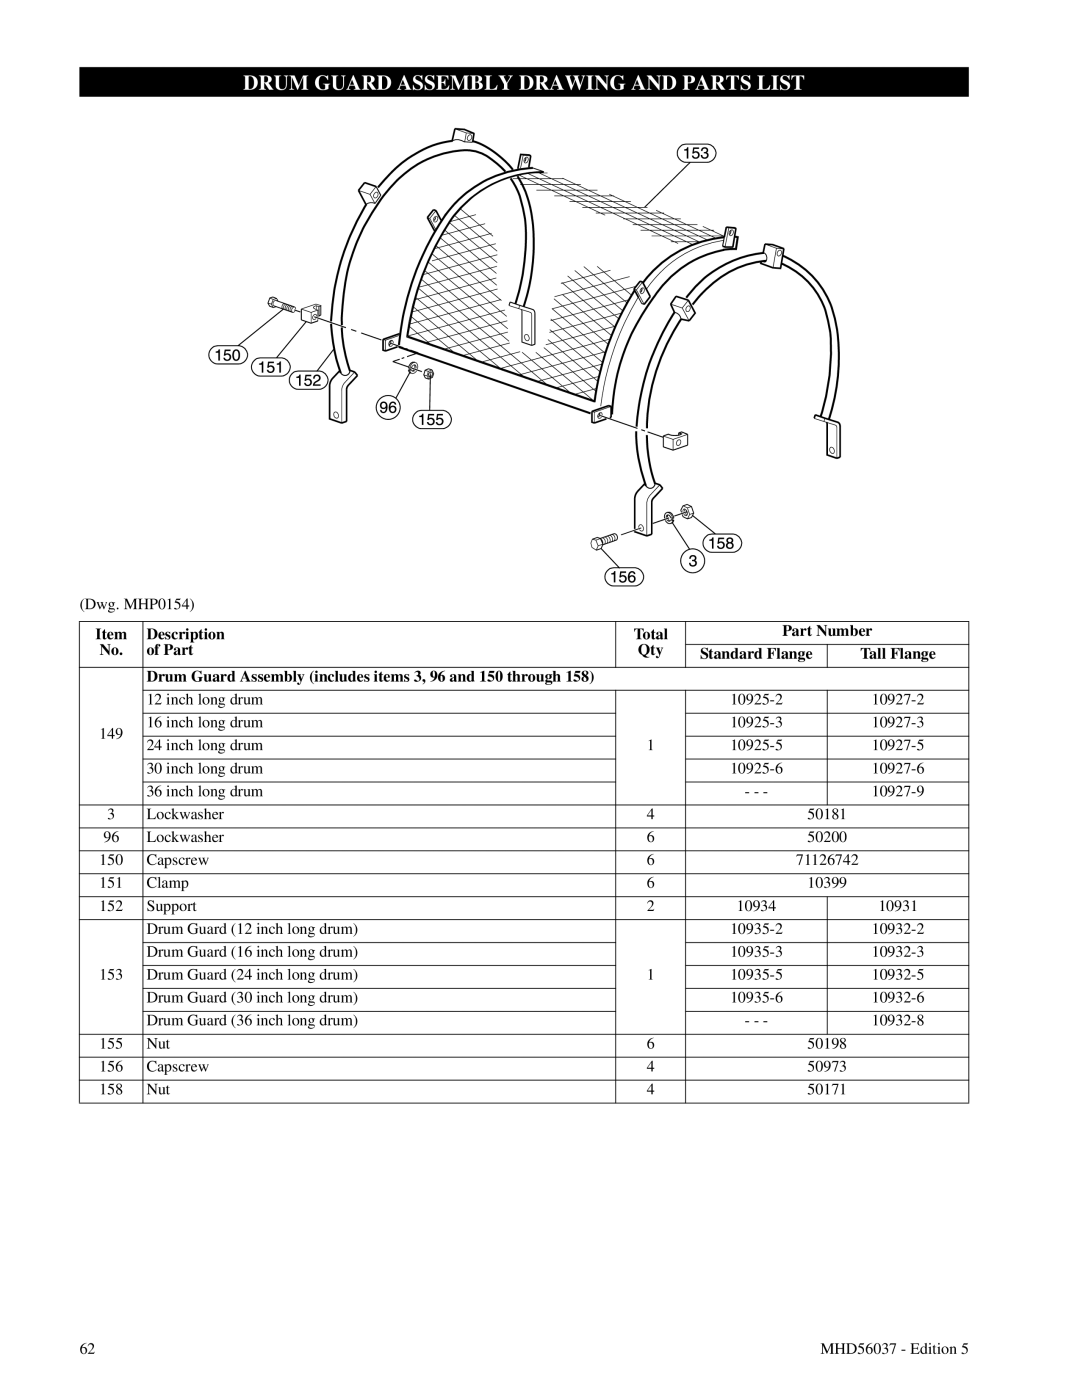 Ingersoll-Rand FA5T Drum Guard Assembly Drawing And Parts List, Description, Part Number, of Part, Standard Flange 